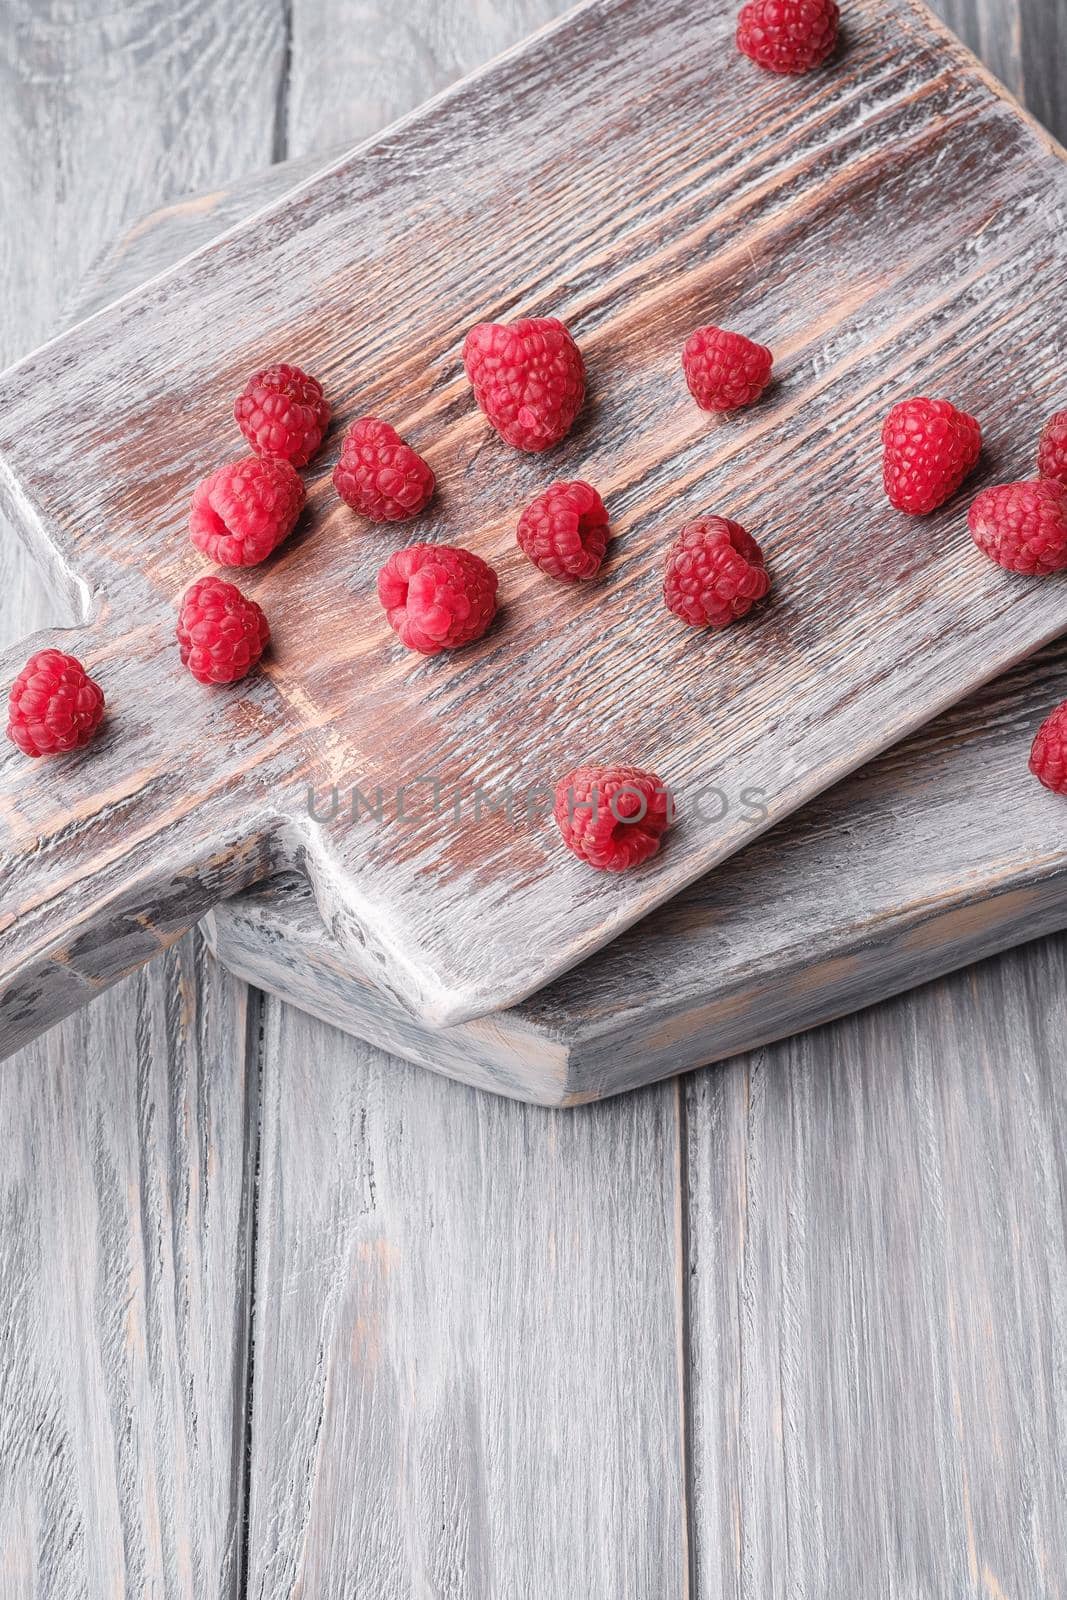 Raspberry fruits on old cutting board, healthy pile of summer berries on grey wooden background, angle view by Frostroomhead